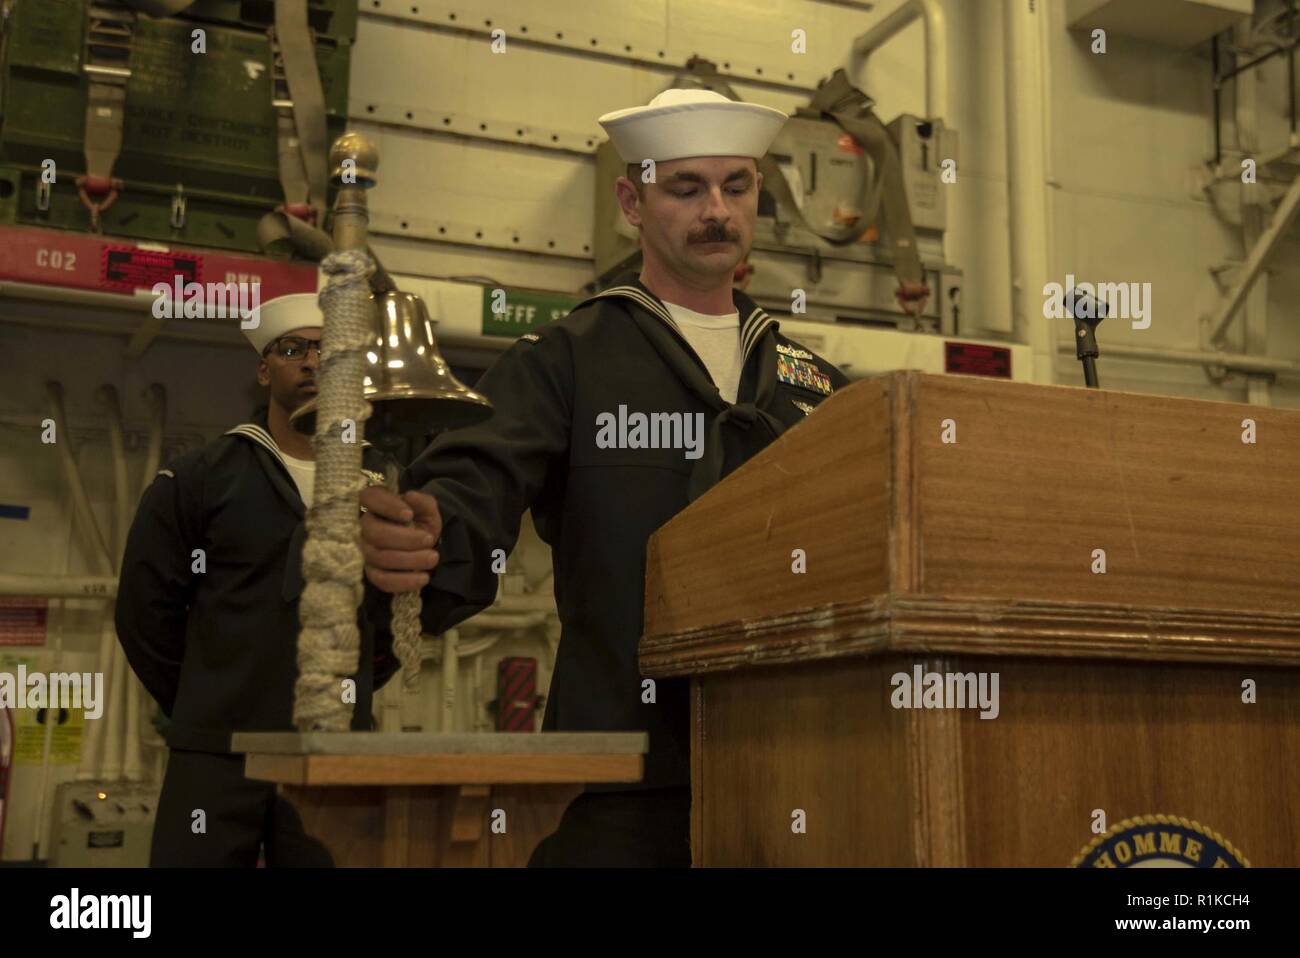 PACIFIC OCEAN (Oct. 10, 2018) Machinist’s Mate 1st Class Jared Alessi, from Buffalo, N.Y., rings the ship’s bell at the 243rd Navy birthday celebration ceremony held in the hangar bay of the amphibious assault ship USS Bonhomme Richard (LHD 6). Bonhomme Richard is operating in the U.S. 3rd Fleet area of operations. Stock Photo